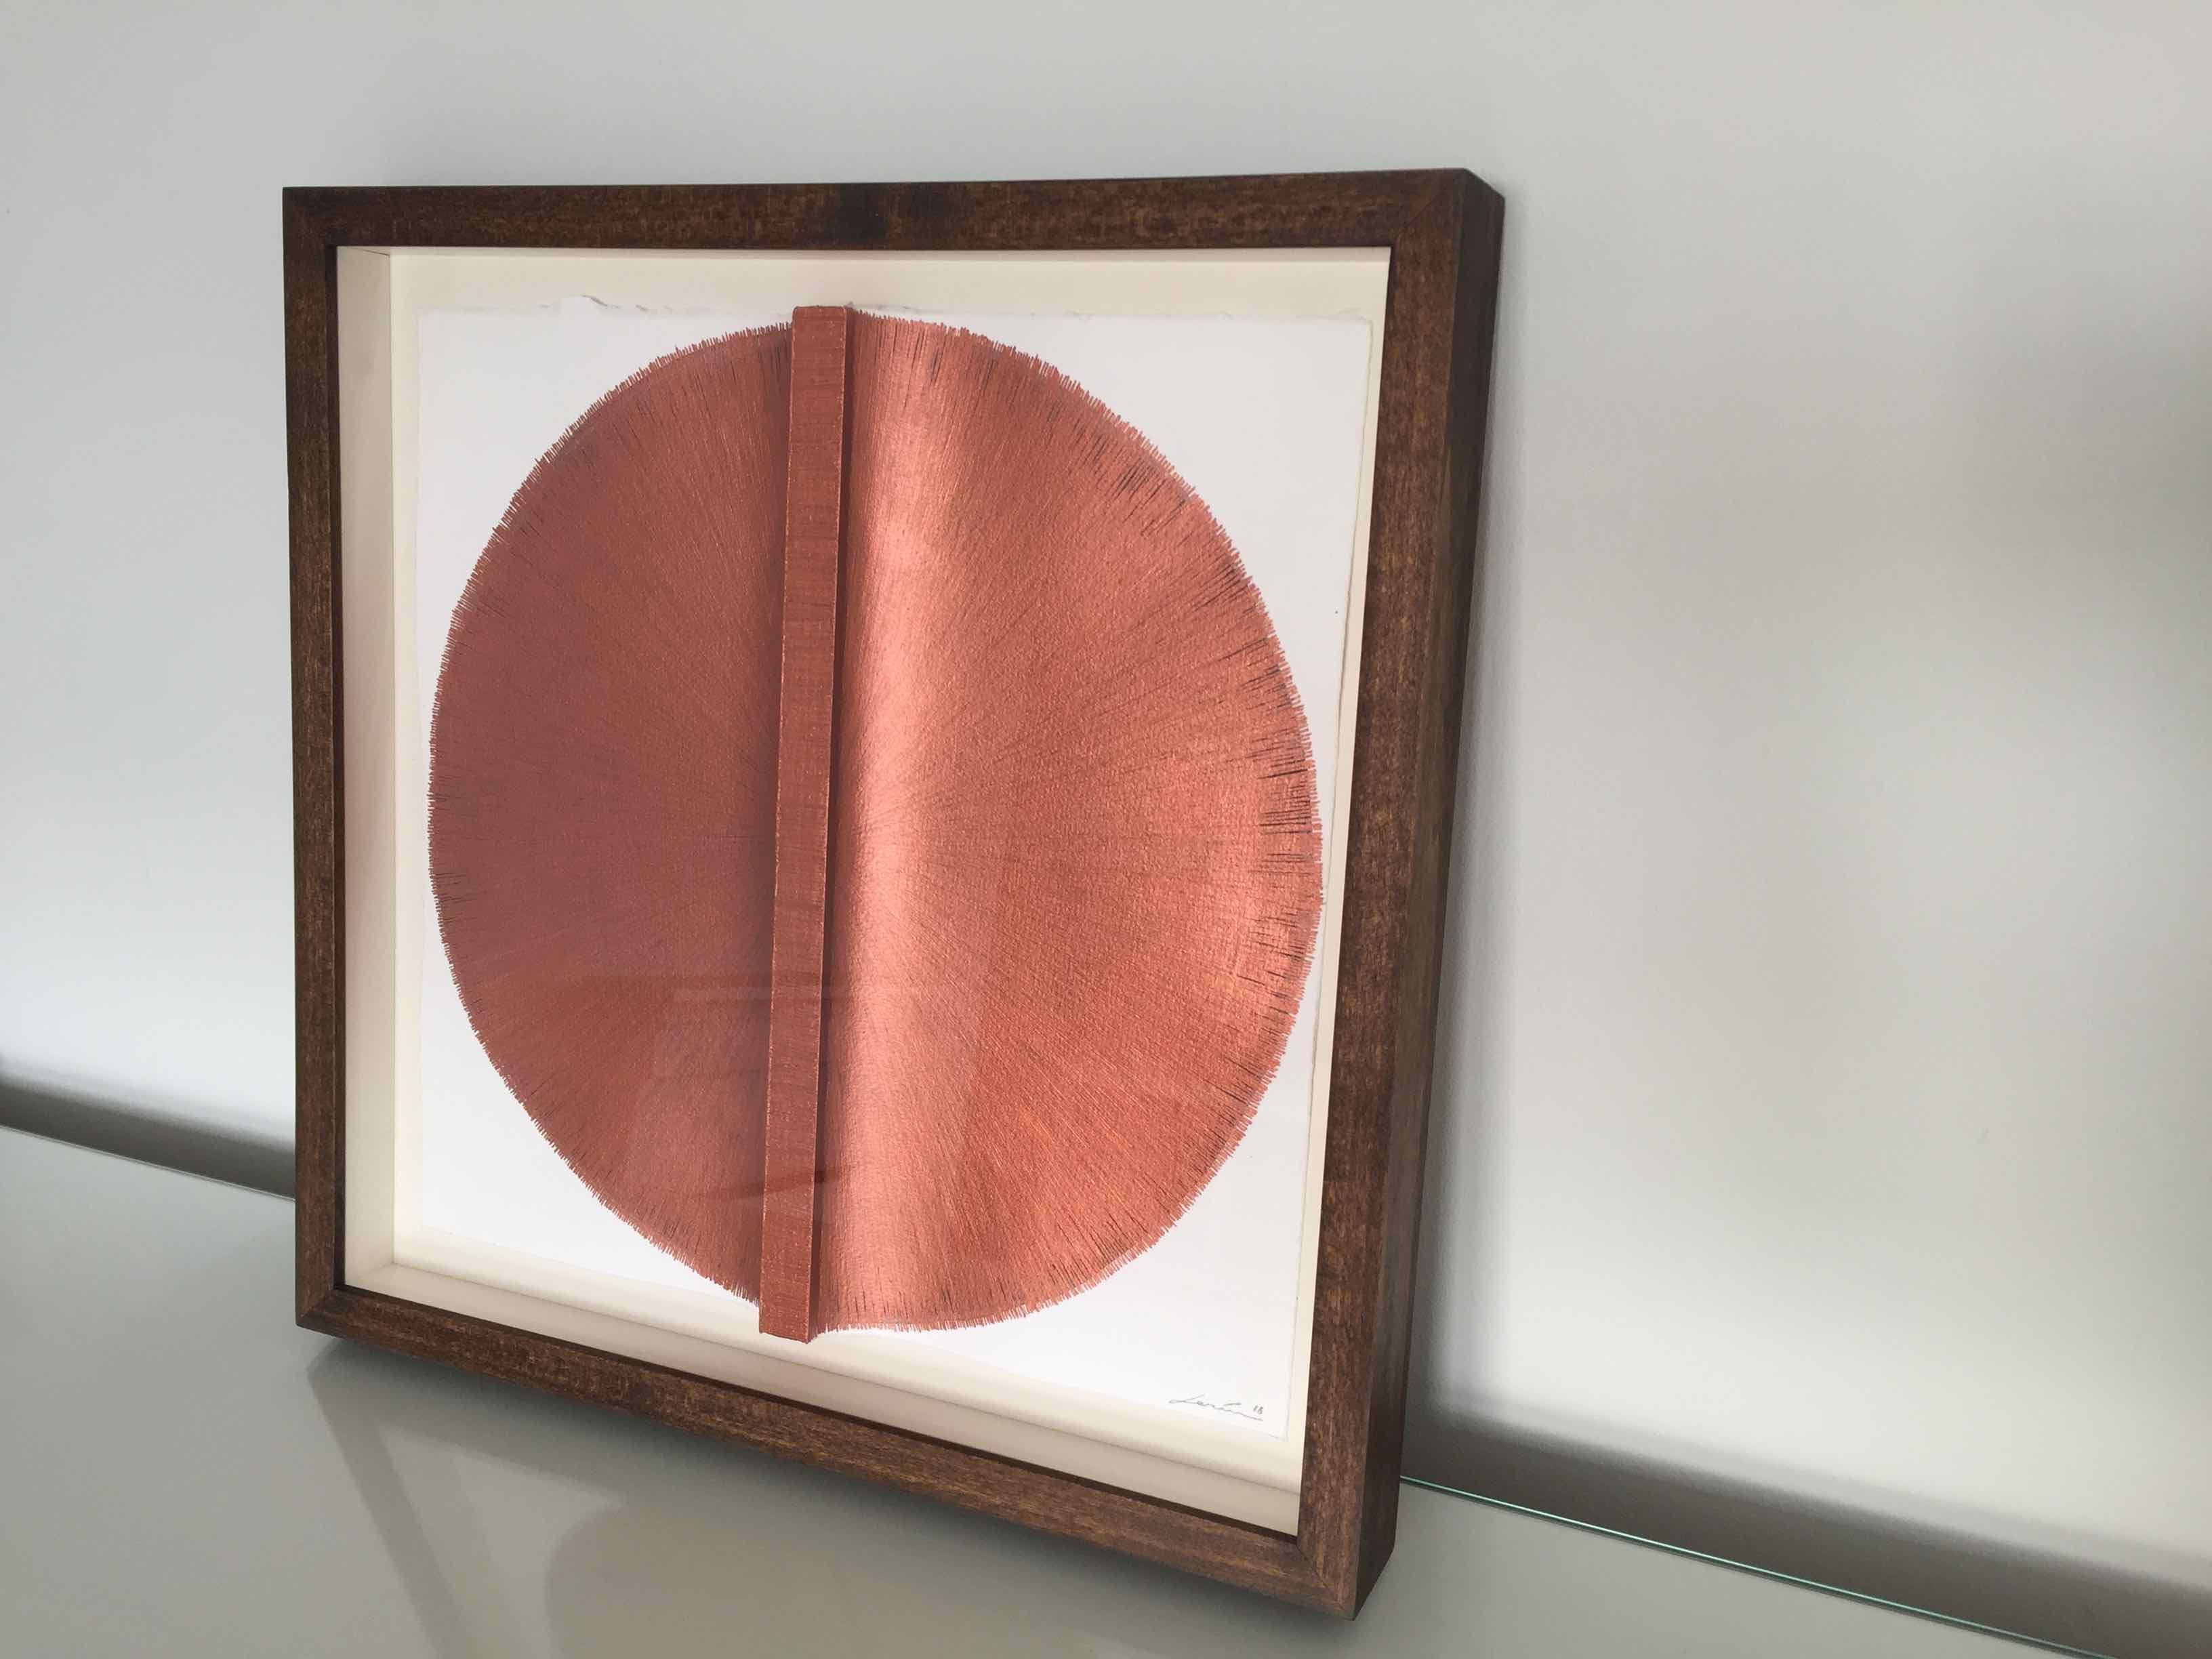 Solid Rod XVI: Copper Circle Painting on paper and wood by Silvia Lerin